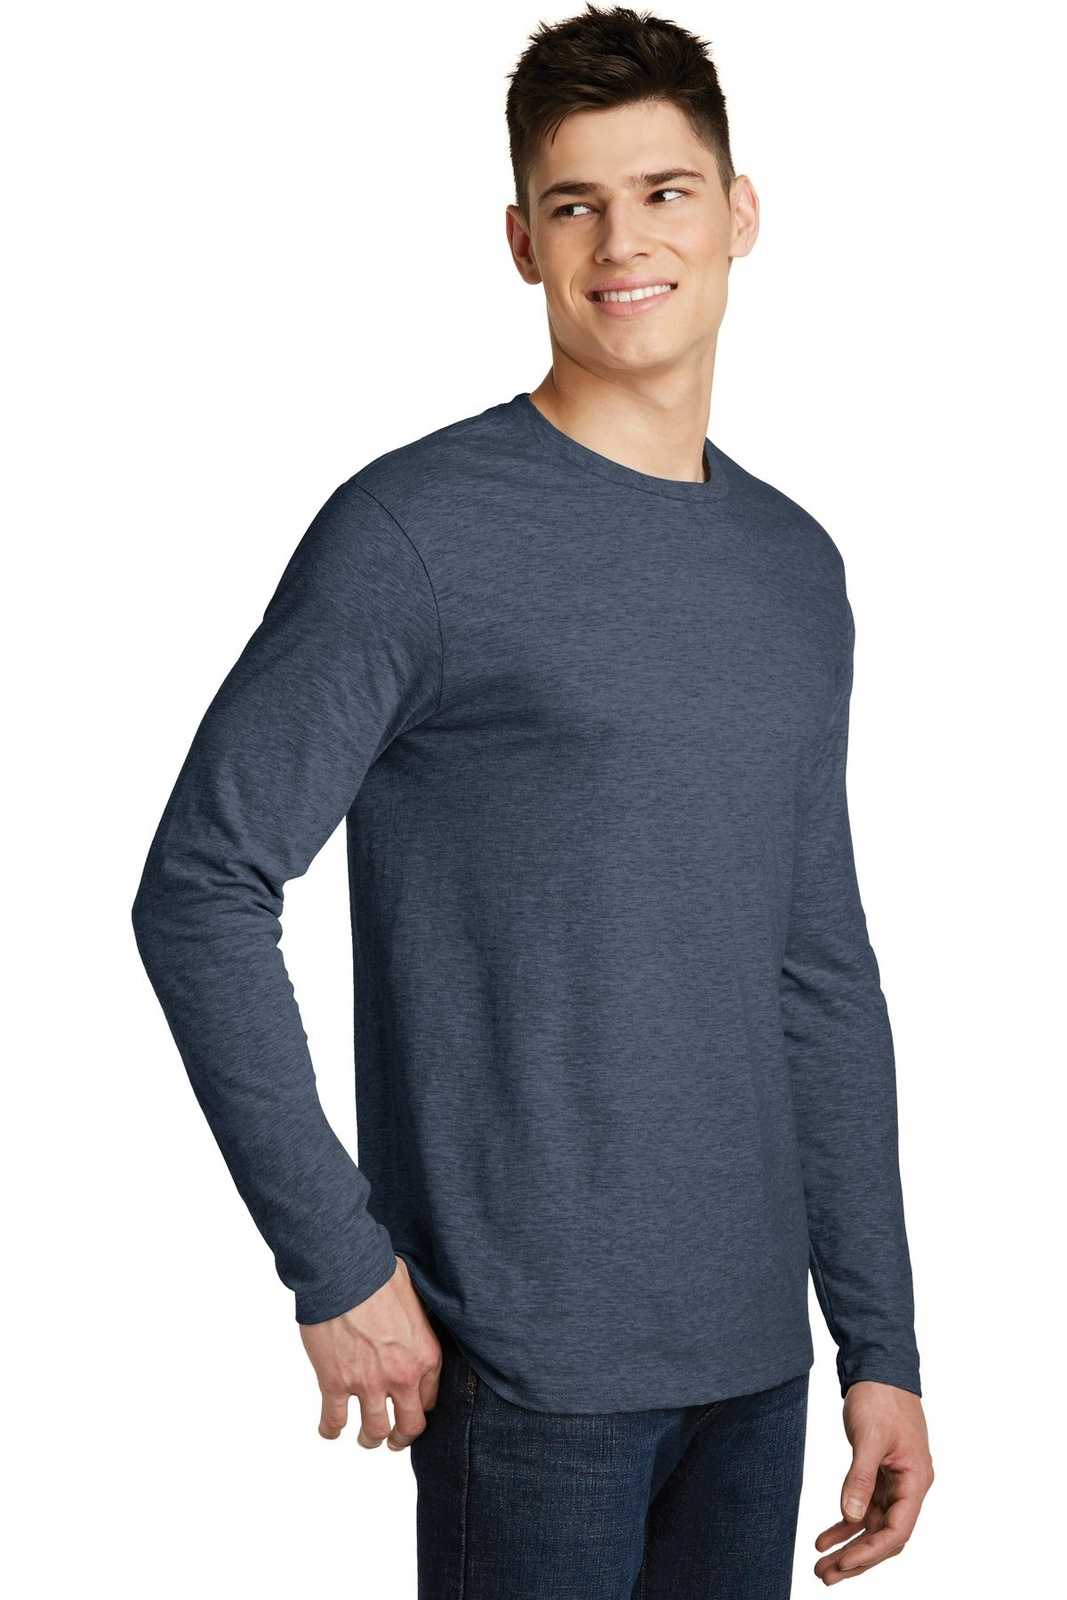 District DT6200 Very Important Tee Long Sleeve - Heathered Navy - HIT a Double - 4